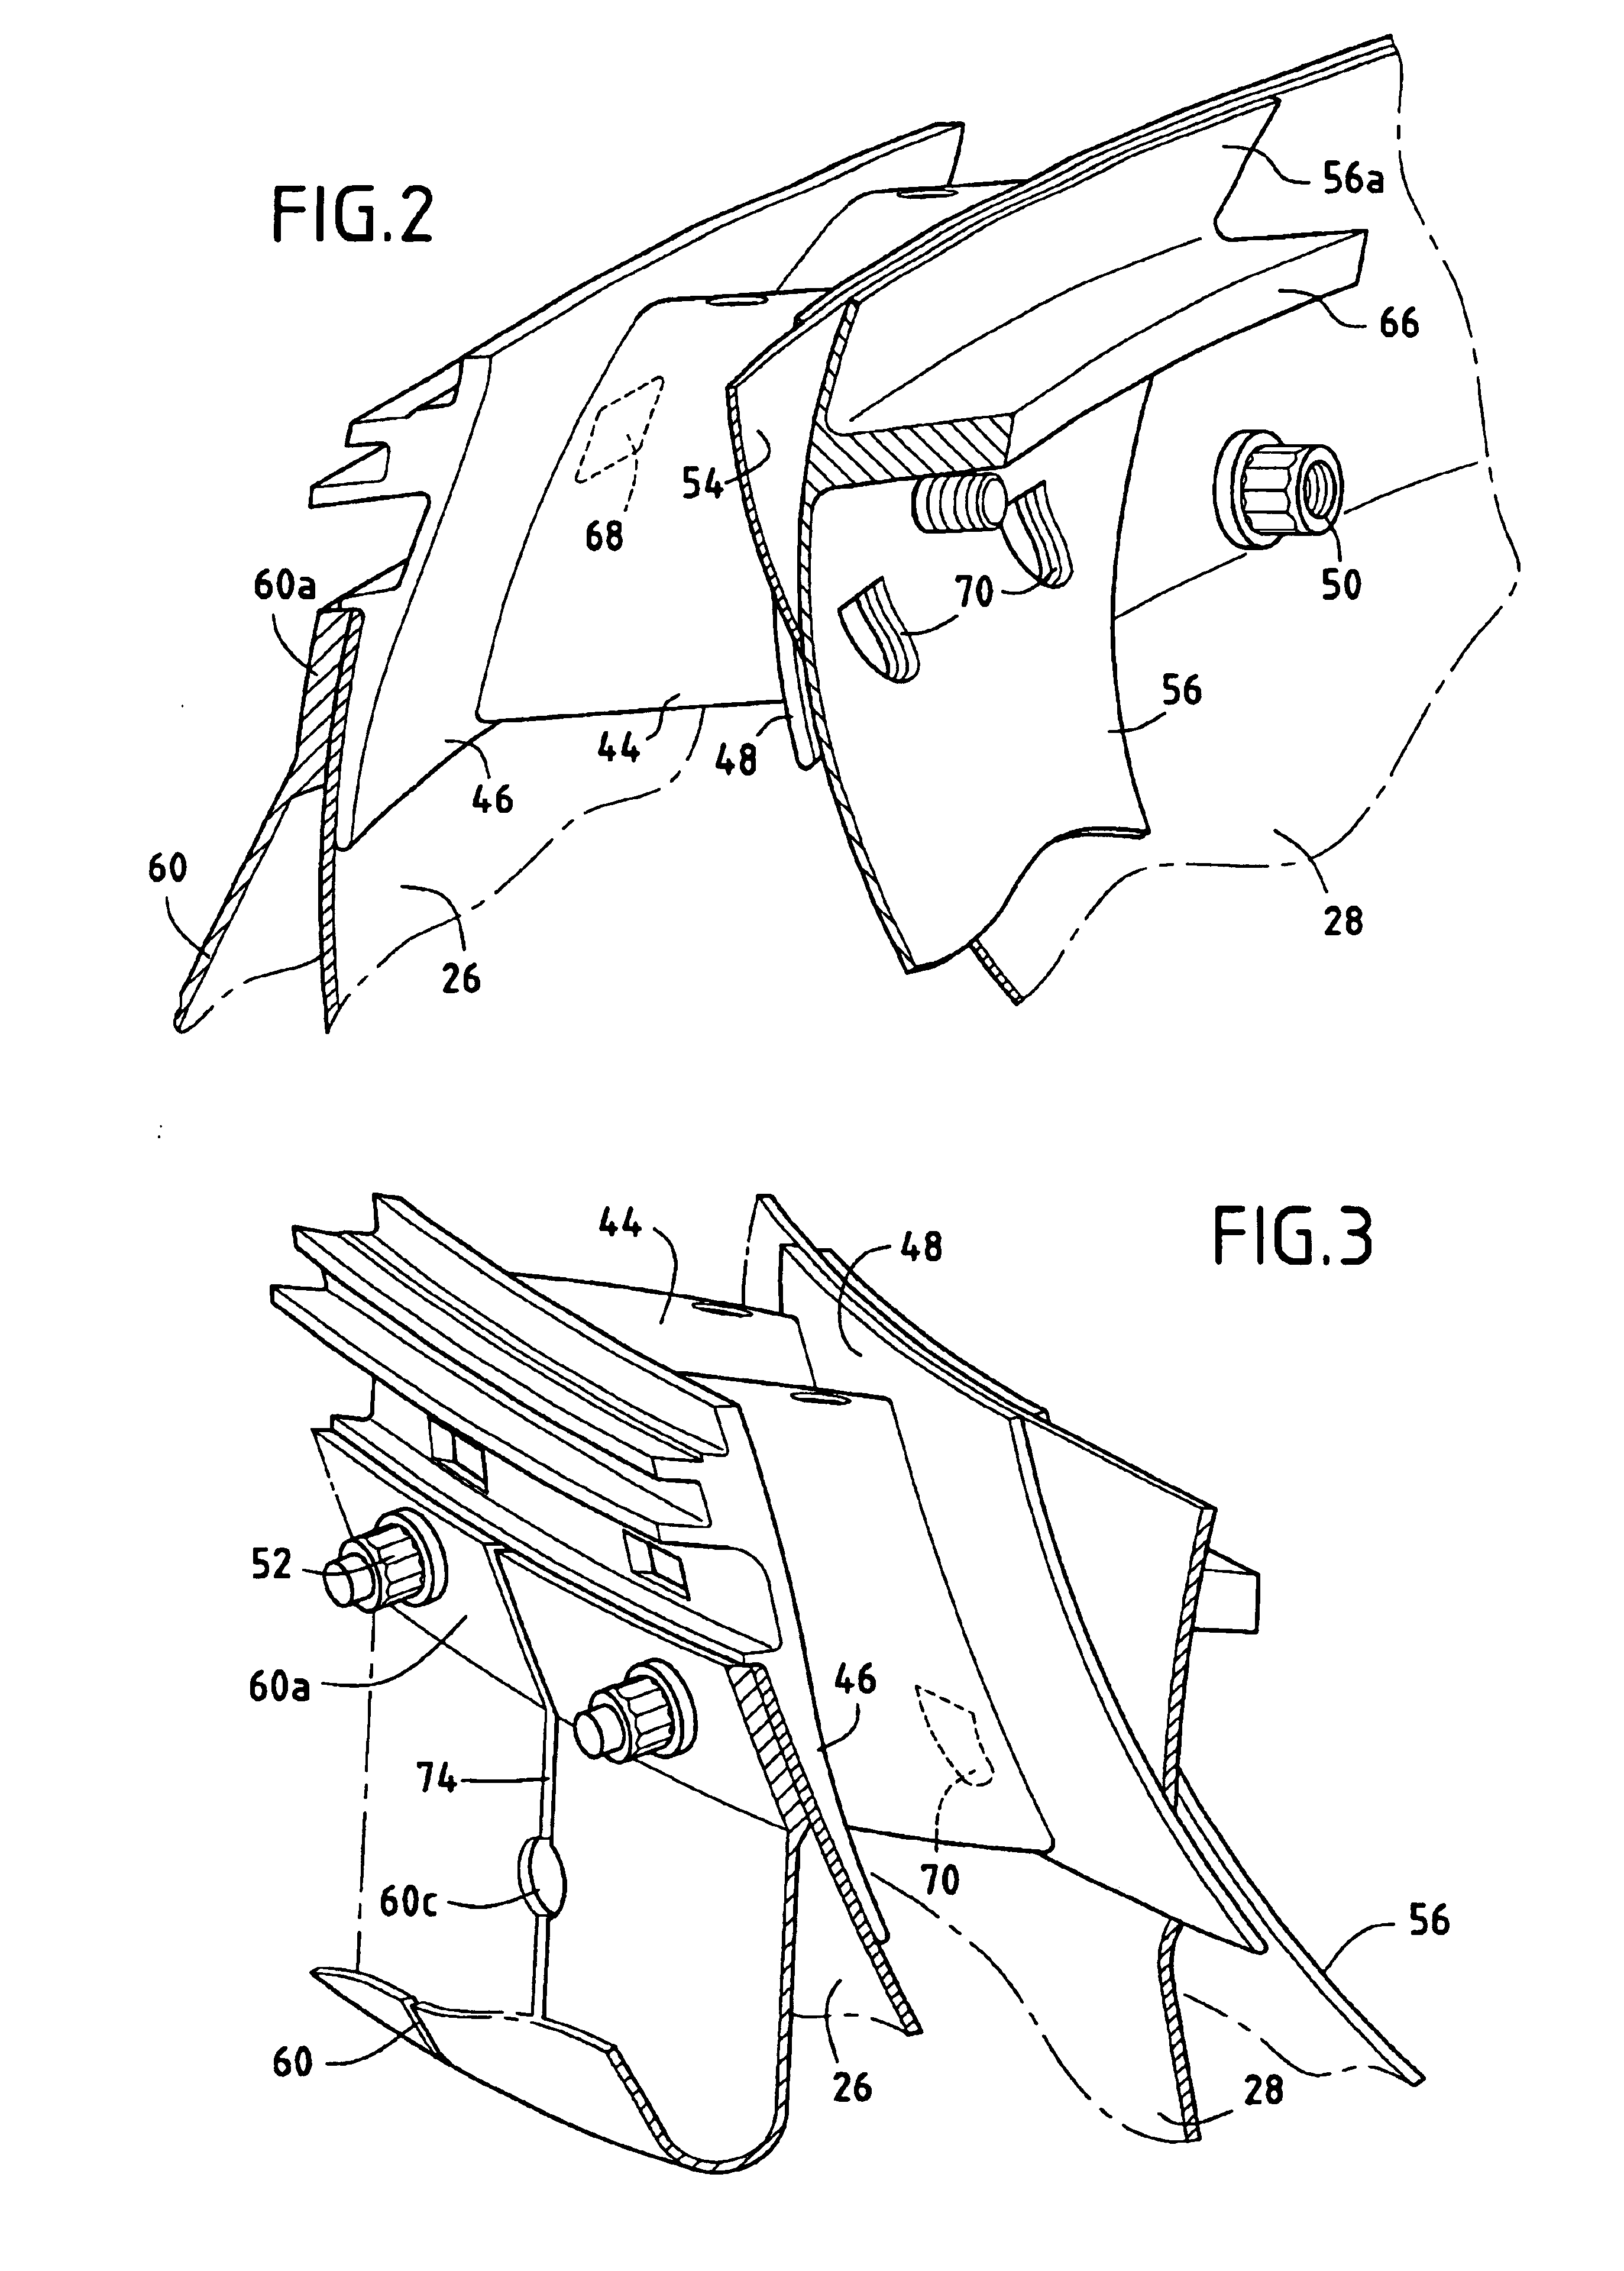 Mounting for a CMC combustion chamber of a turbomachine by means of flexible connecting sleeves